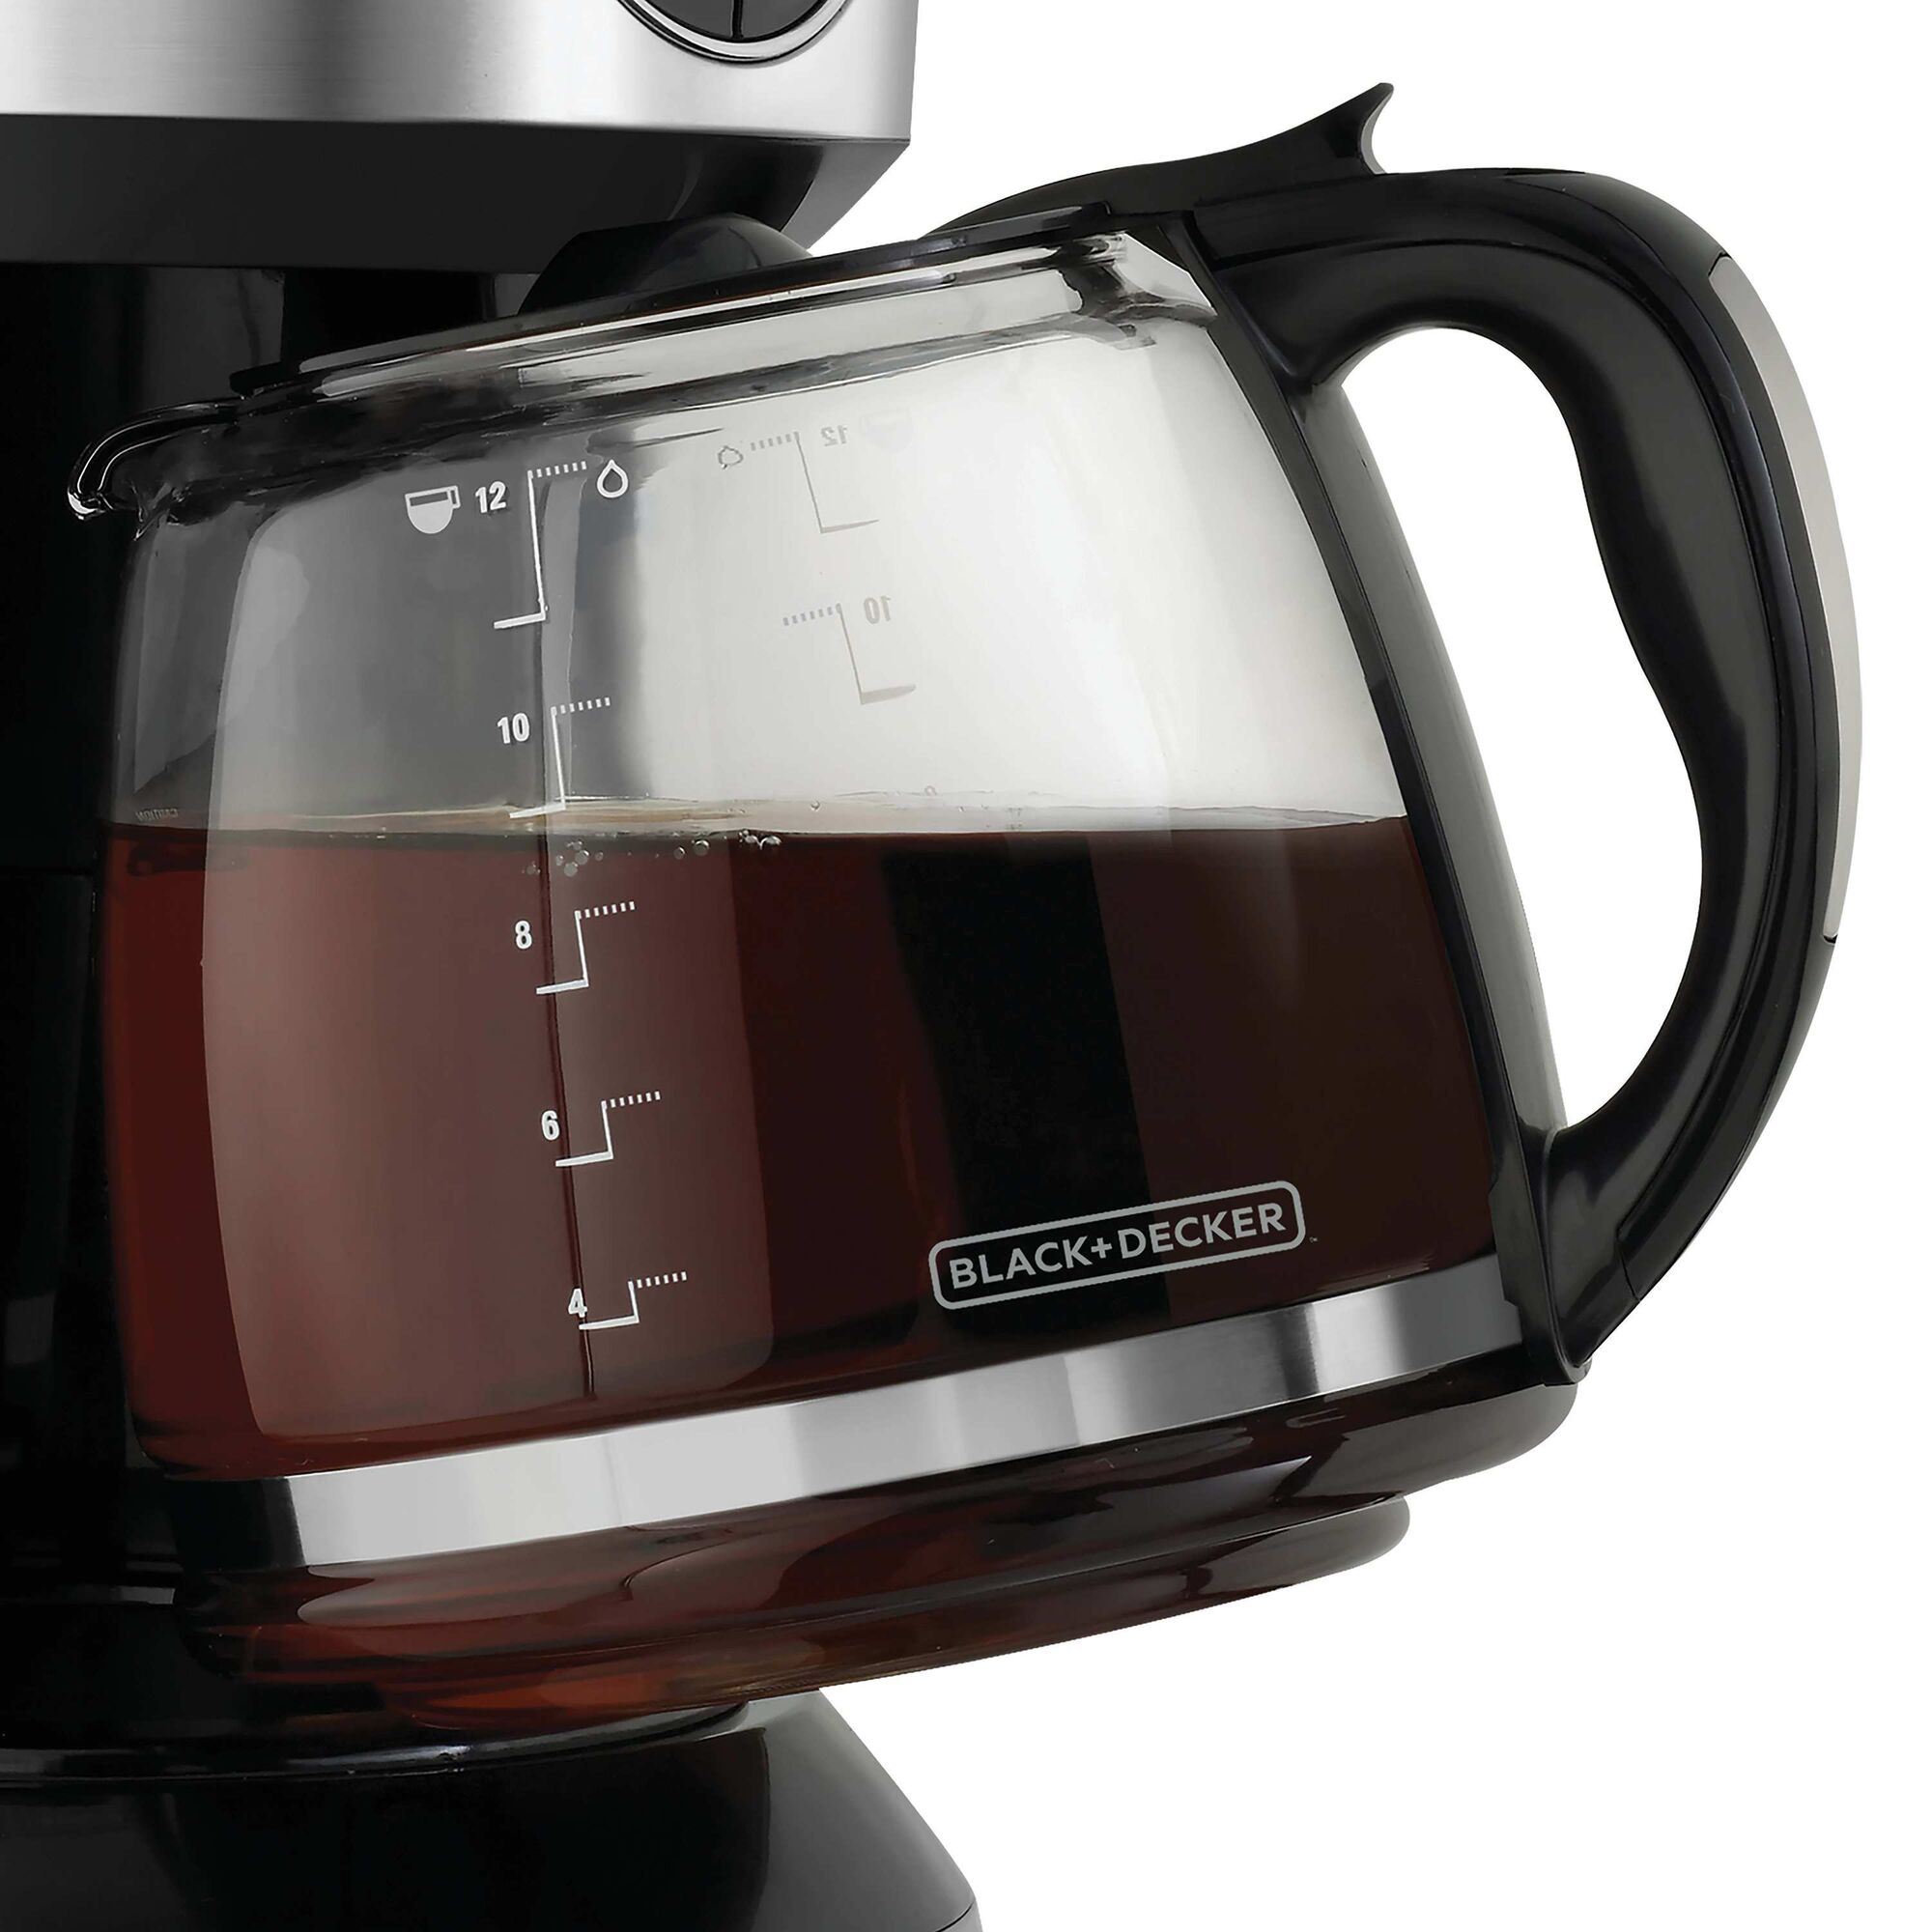 12 cup programmable coffee maker.